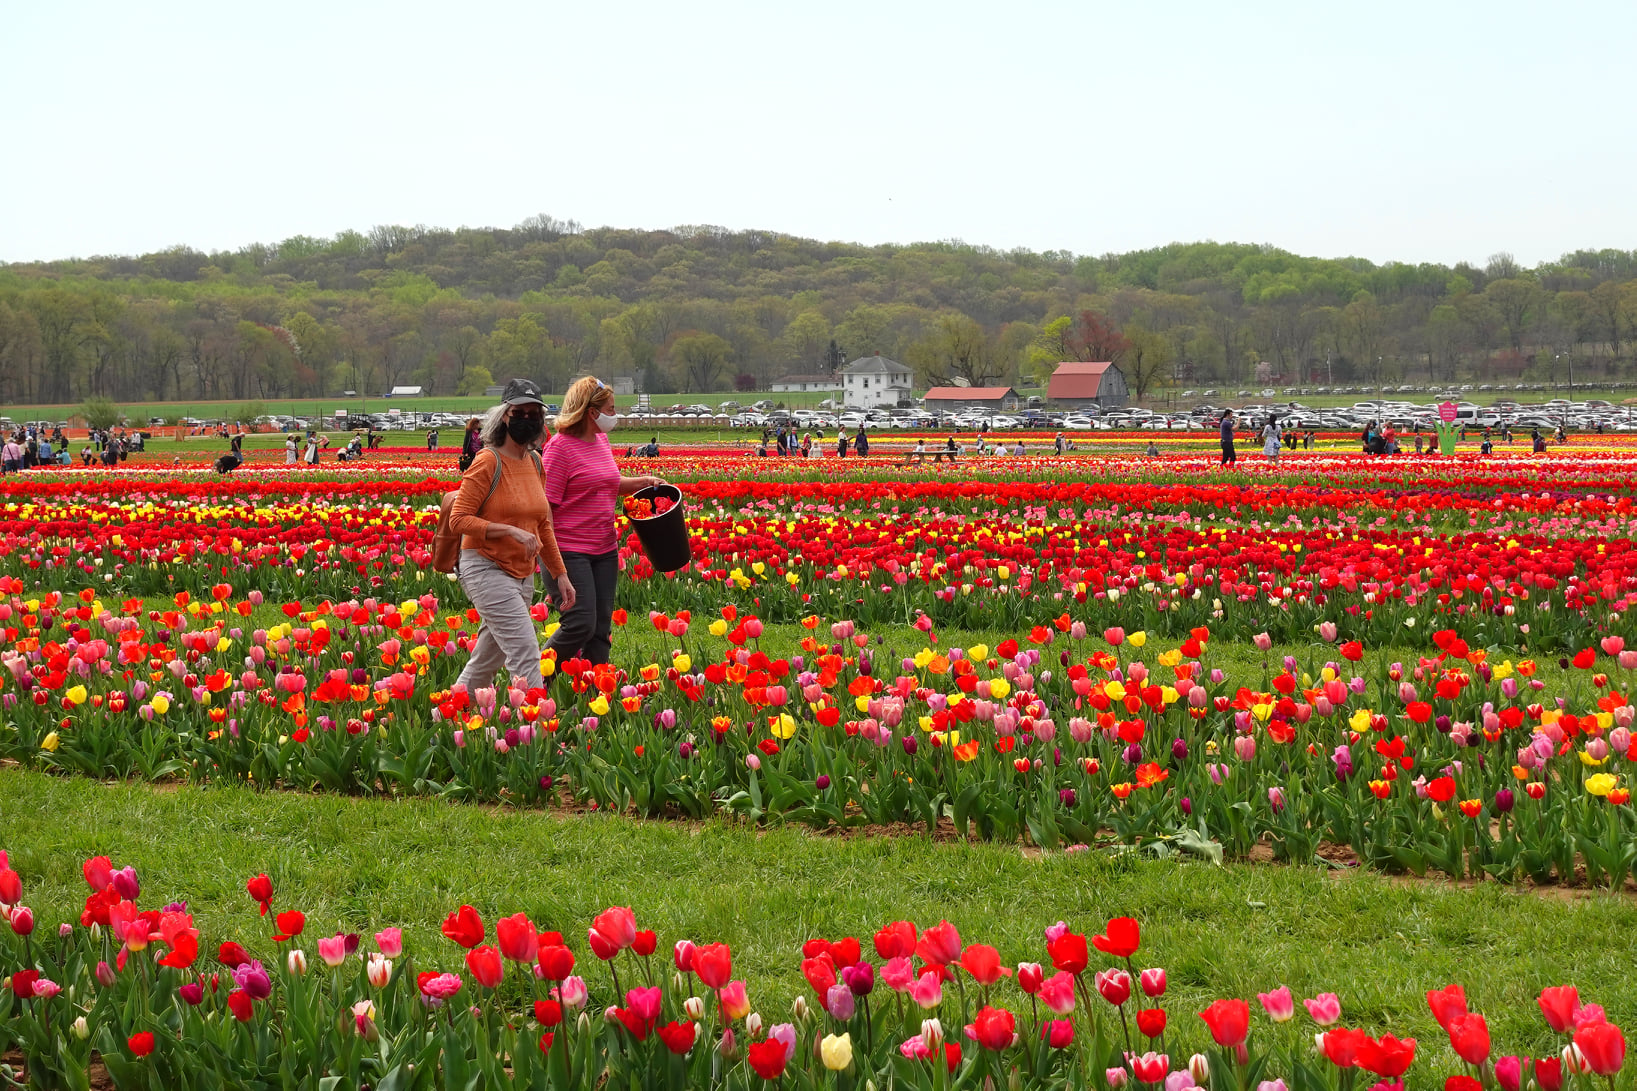 Holland Ridge Farm's Tulip Festival Is A New Jersey Spring Tradition